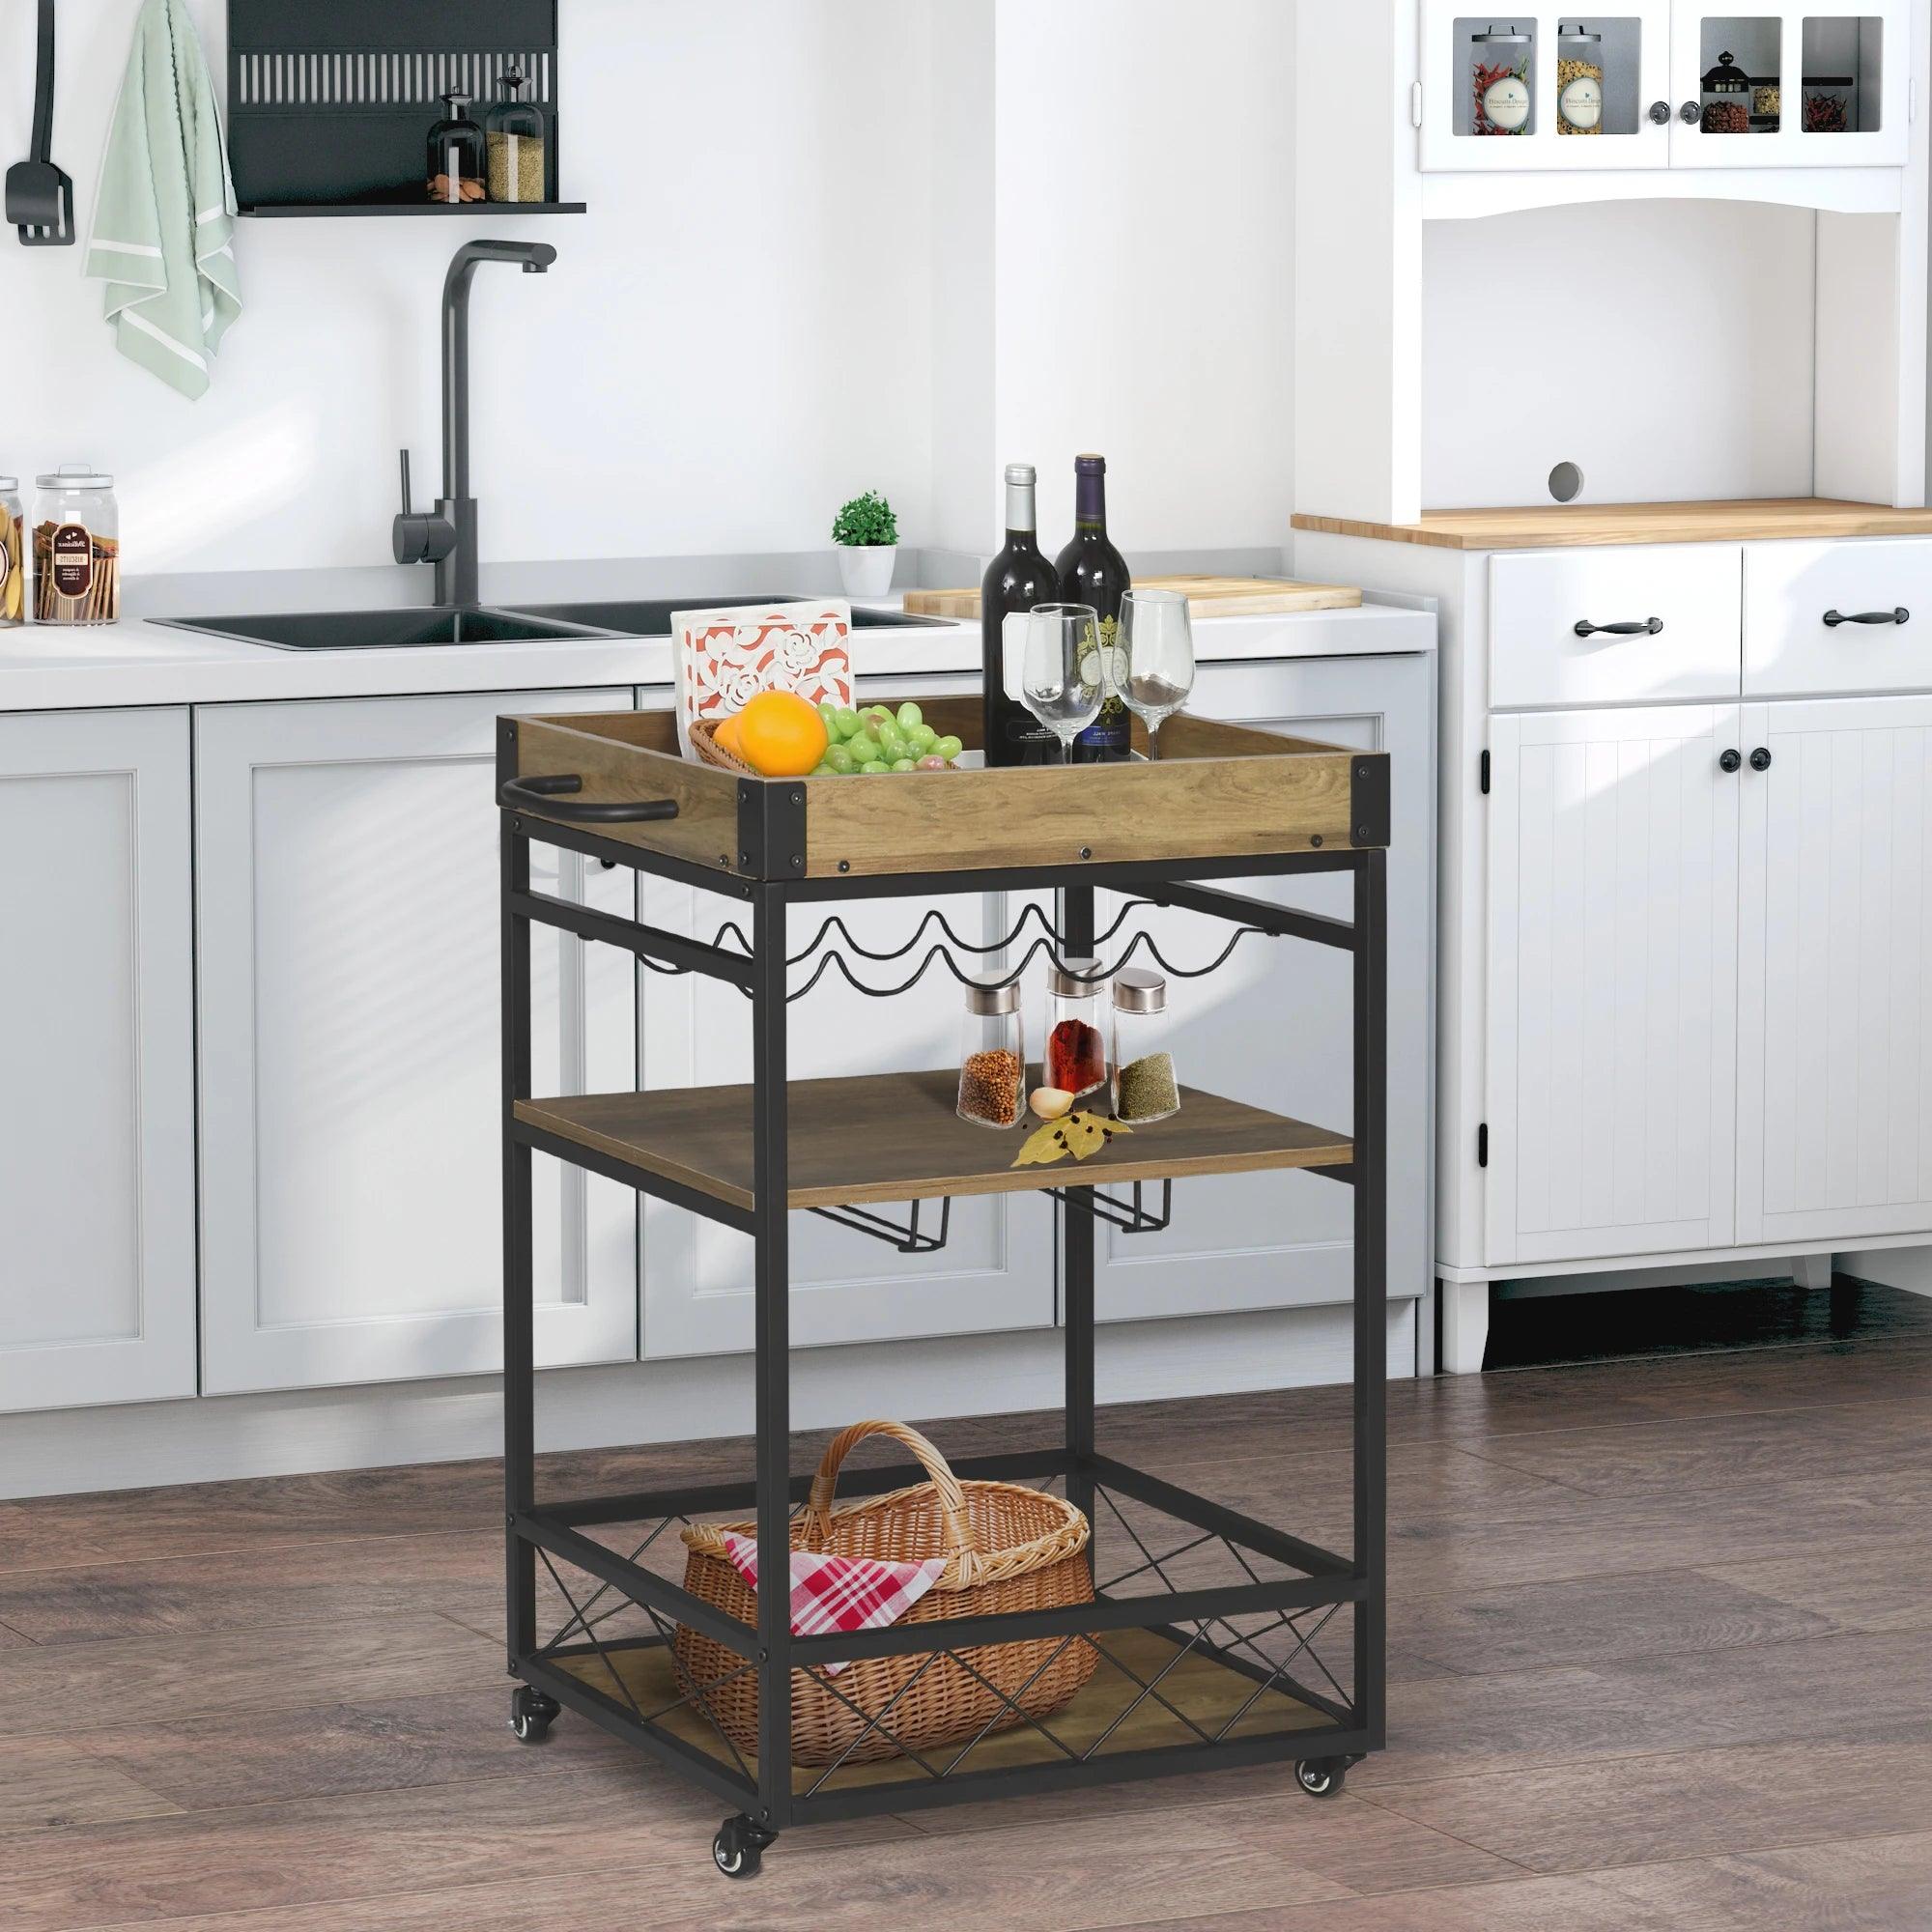 Retro Industrial Bar Serving Cart Rolling Kitchen Island Storage Utility Trolley with 5-bottle Wine Rack & Serving Tray